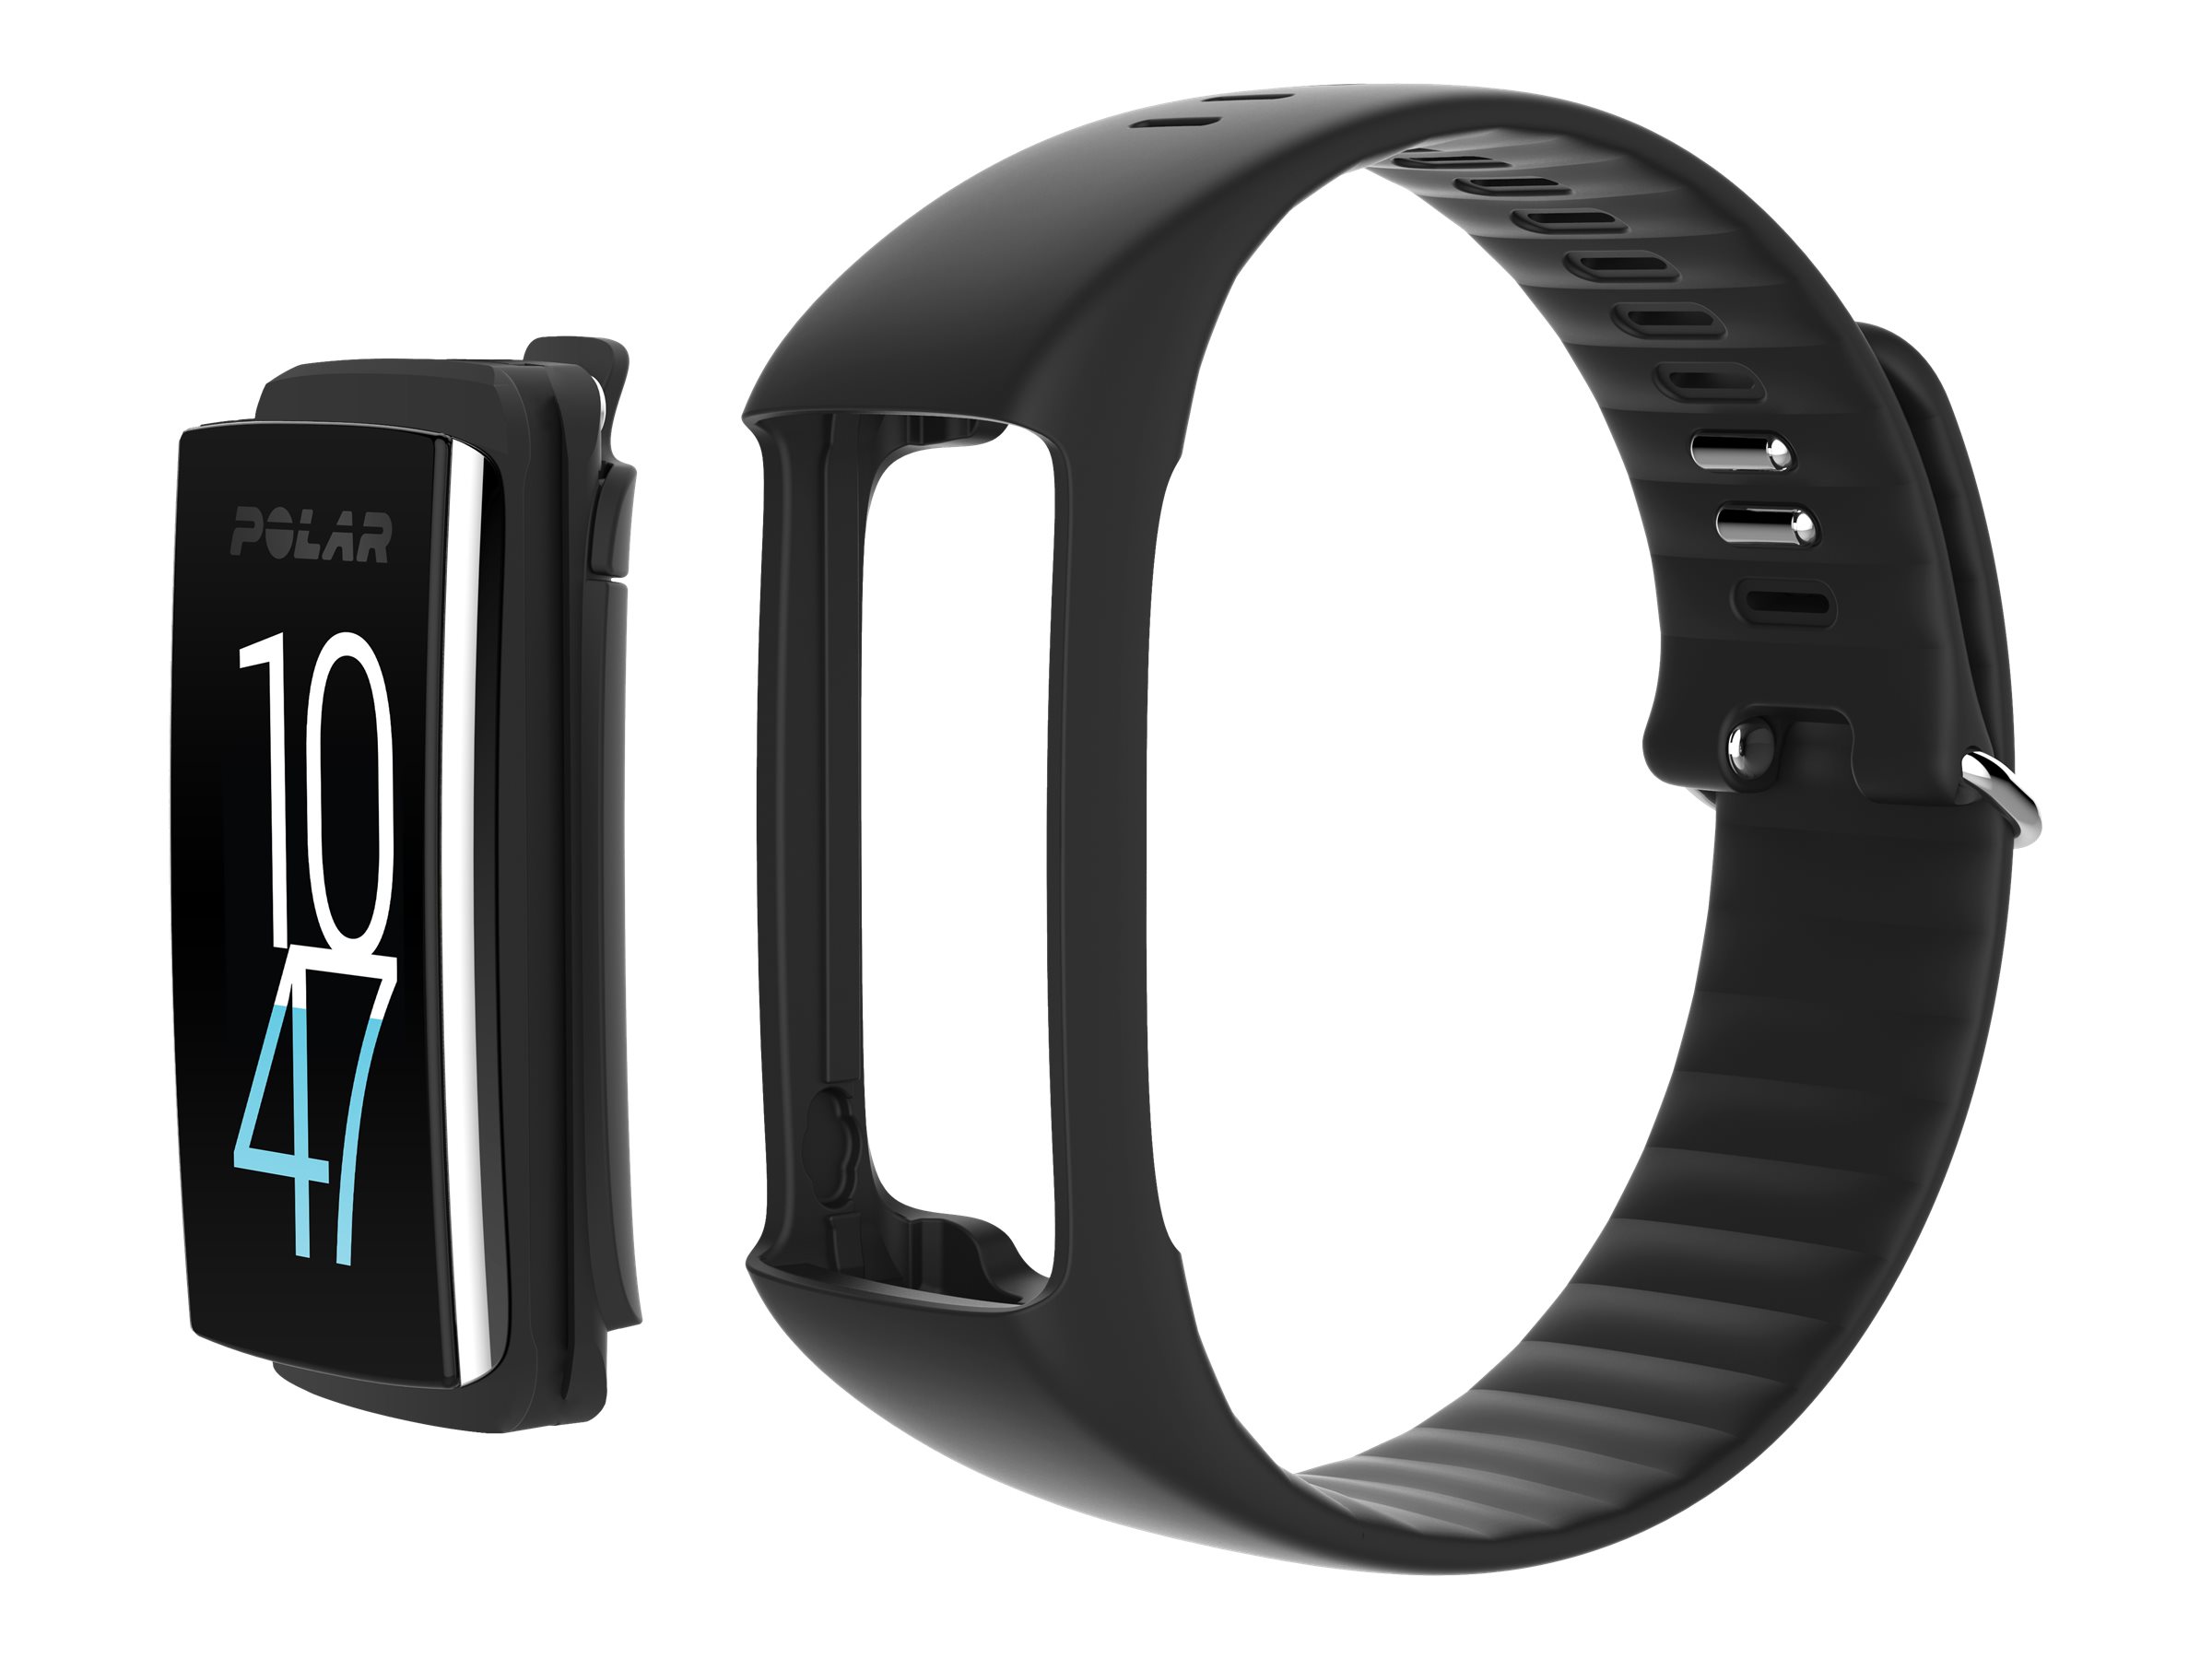 Polar A360 Fitness Tracker with Wrist Heart Rate Monitor - image 2 of 4